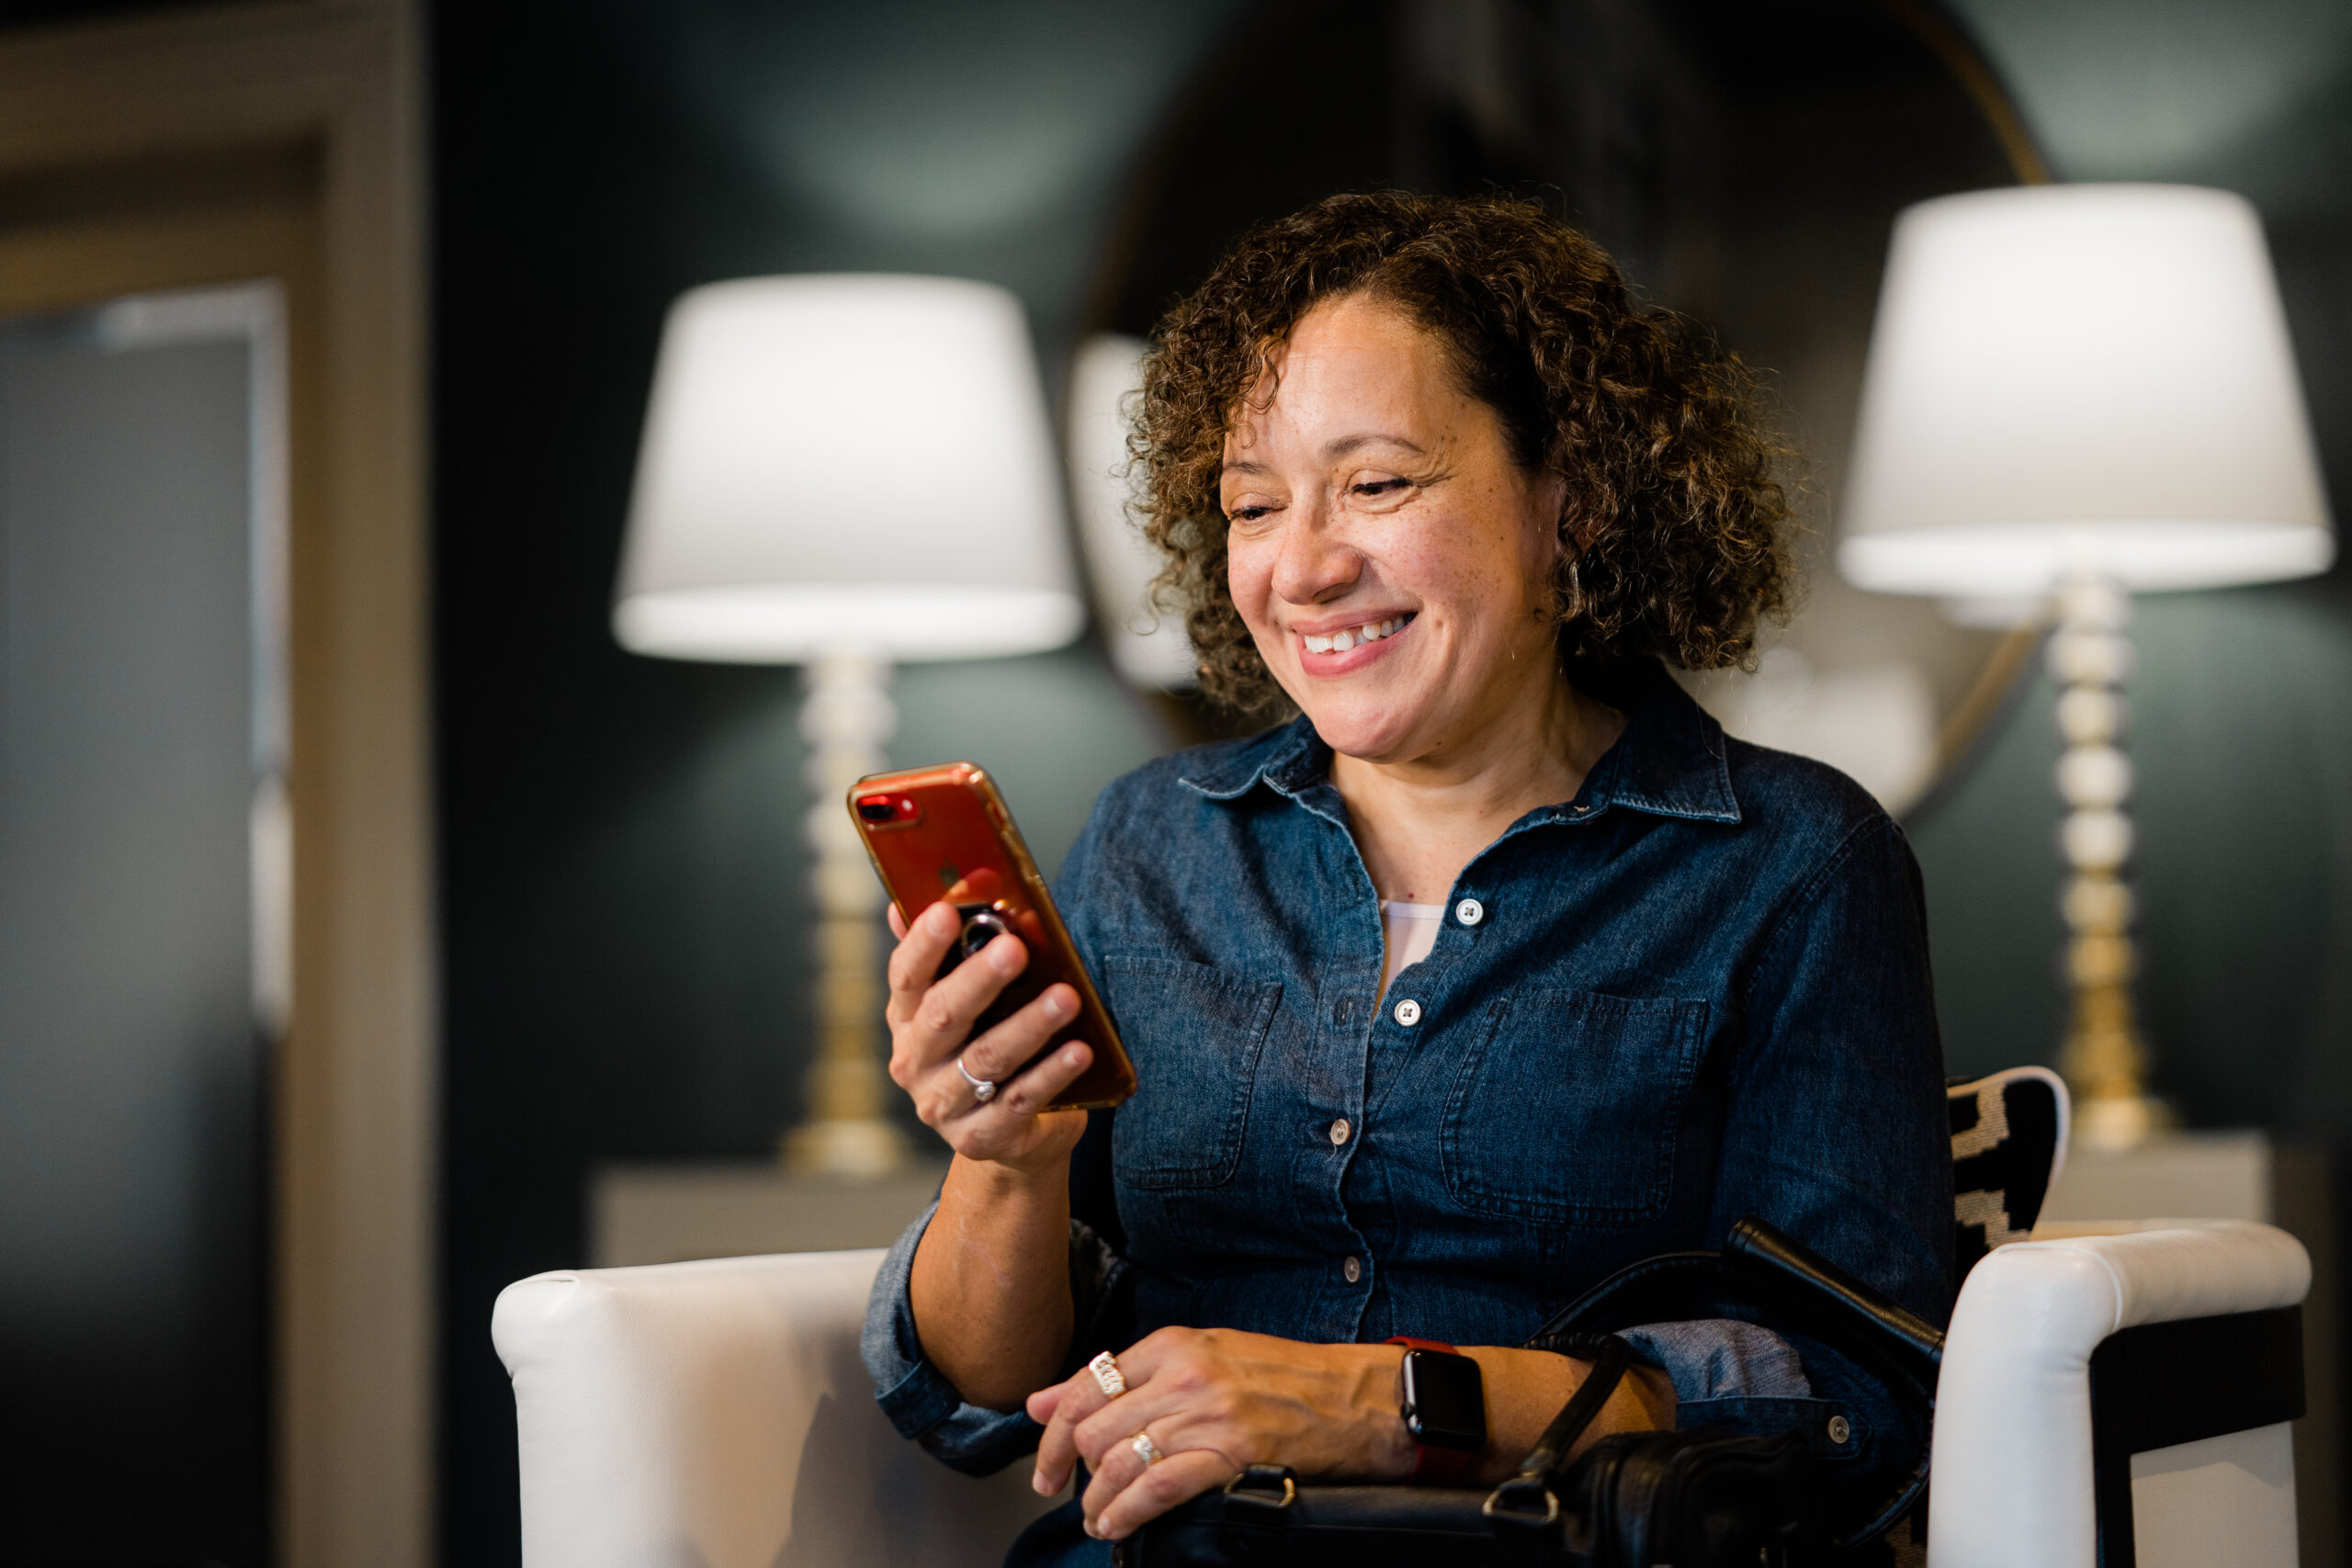 A woman is sitting down while using her phone. She is smiling.